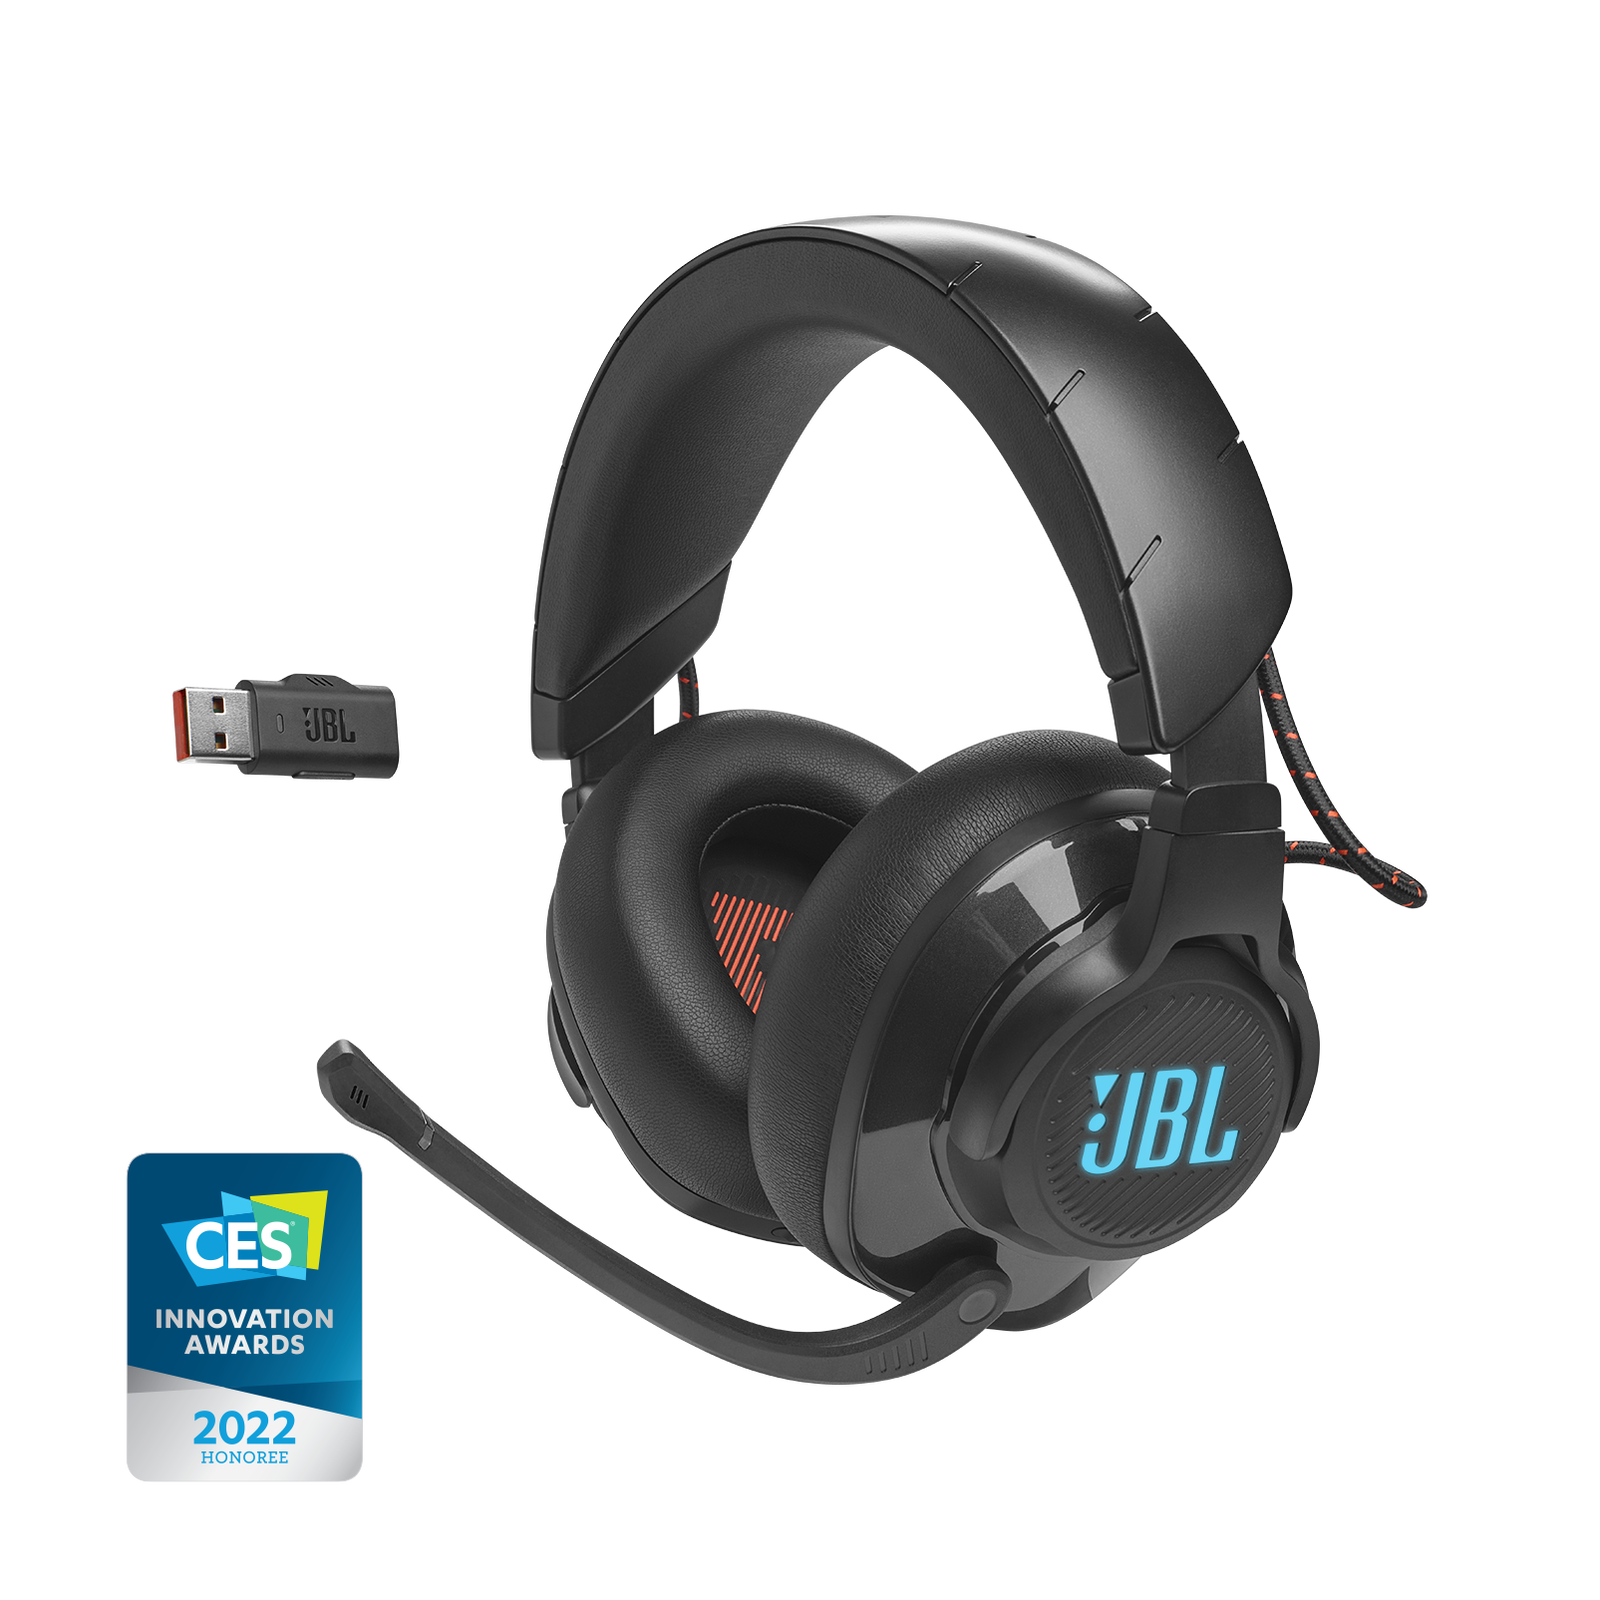 JBL Quantum 610 Black | Over-Ear 2.4G Wireless Gaming Headset - JBL 9.1 Surround Sound & Mic Noise Cancelling - PS5/XBOX One/Switch/PC Compatible Gaming Headset